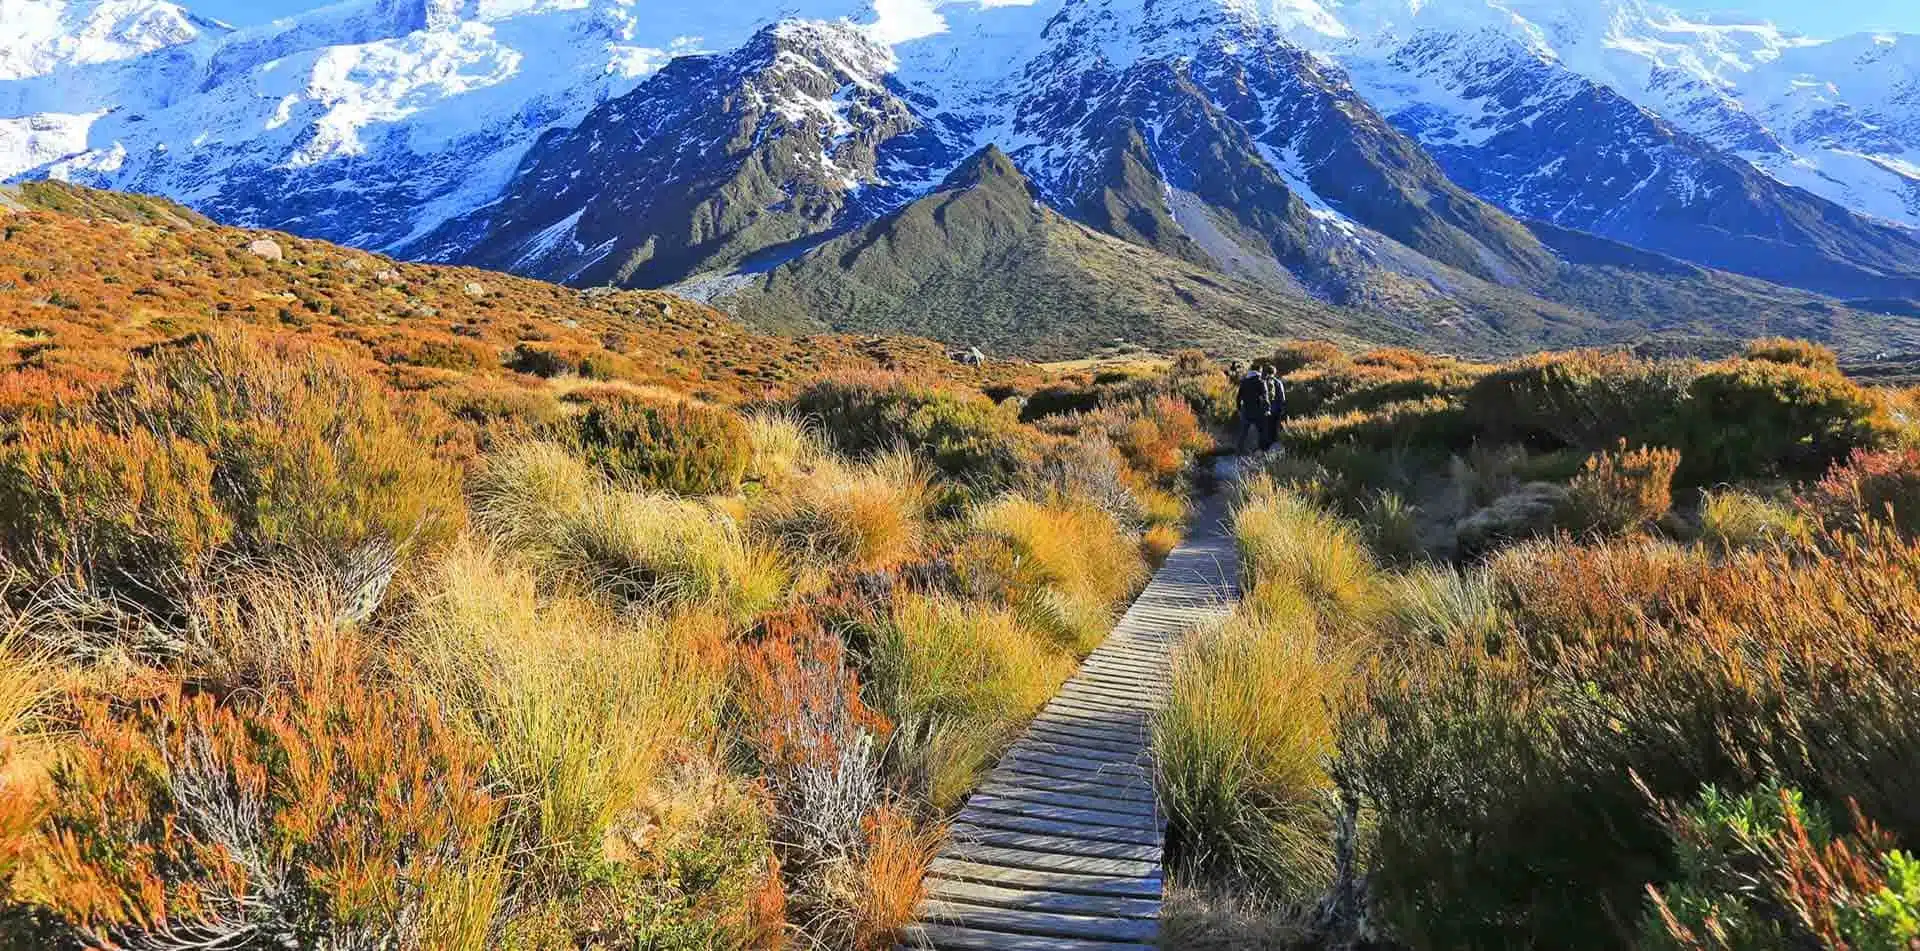 Explore New Zealand, on foot and at eye level